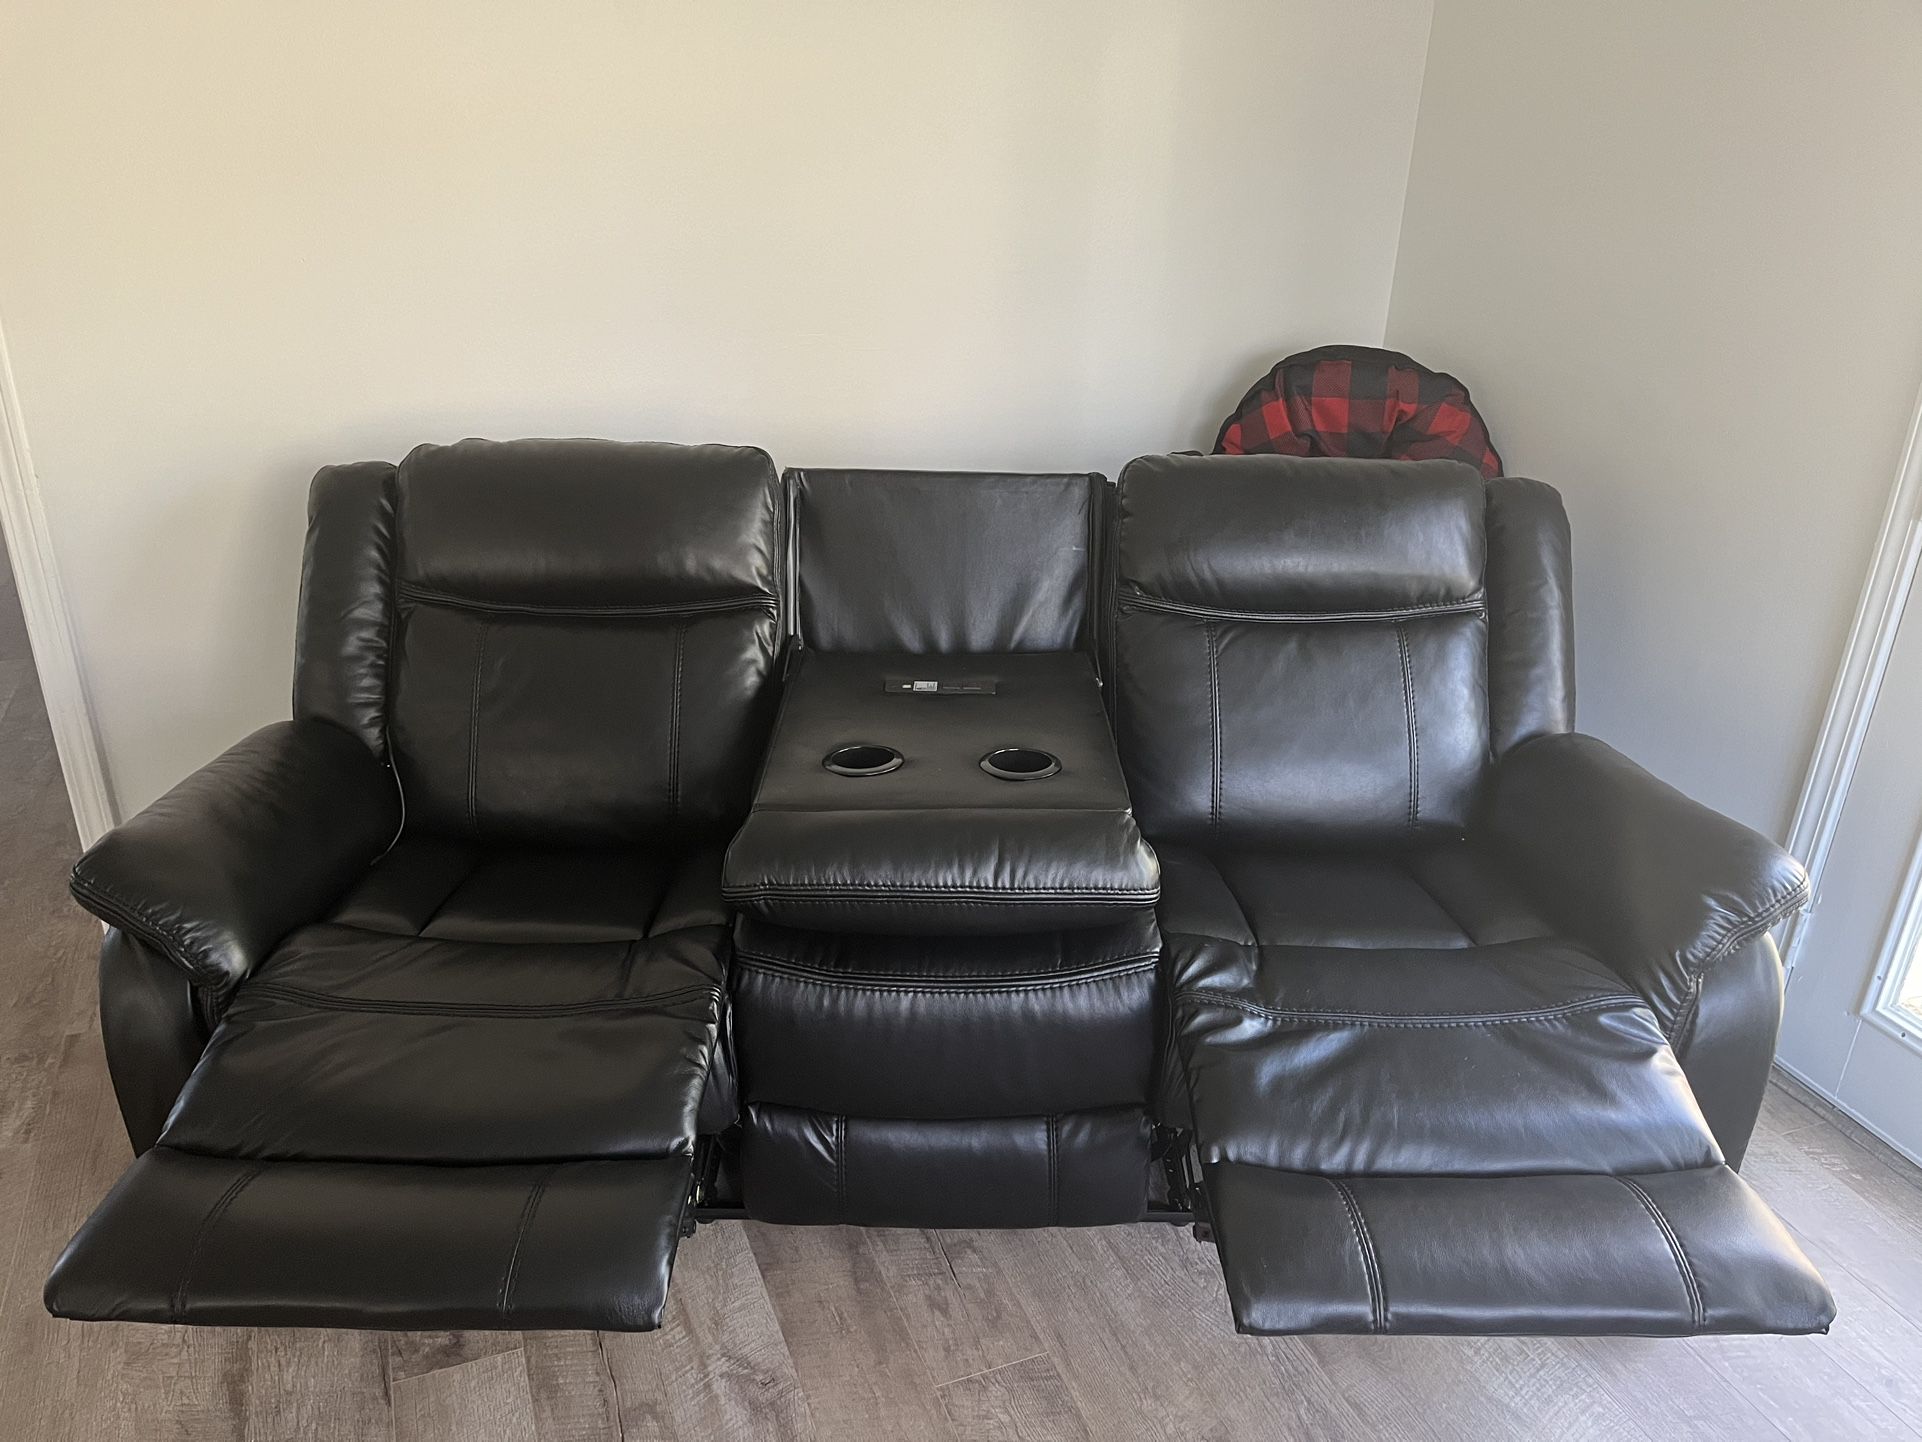 BLACK LEATHER RECLINERS